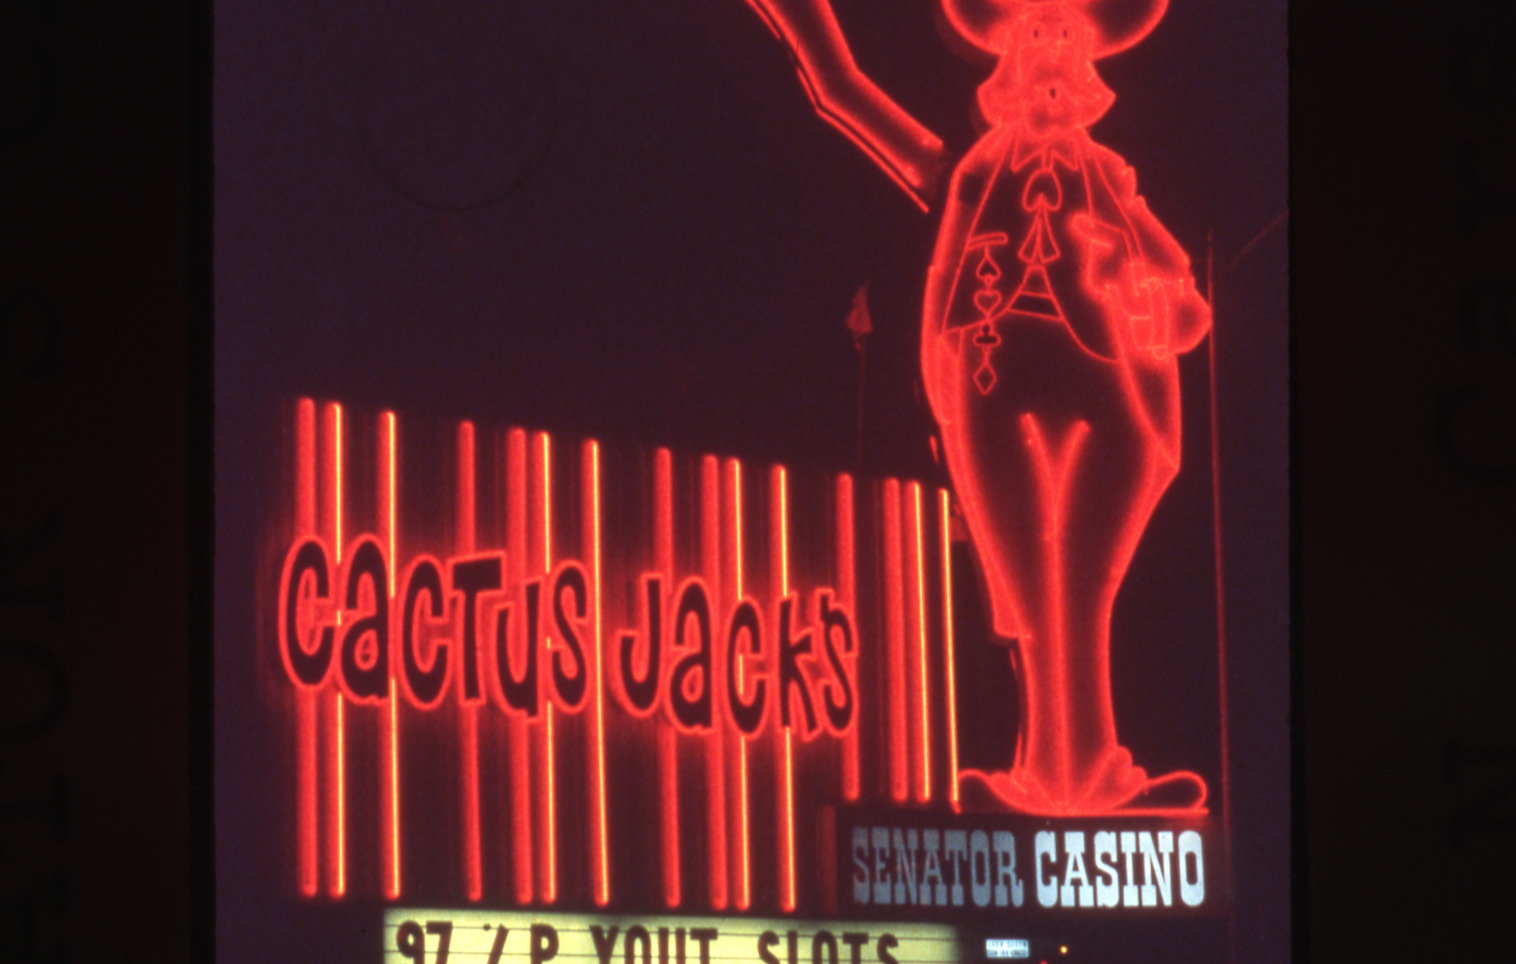 Cactus Jack's Senator Casinolettering, marquee, and flag mounted wall signs, Carson City, Nevada: photographic print